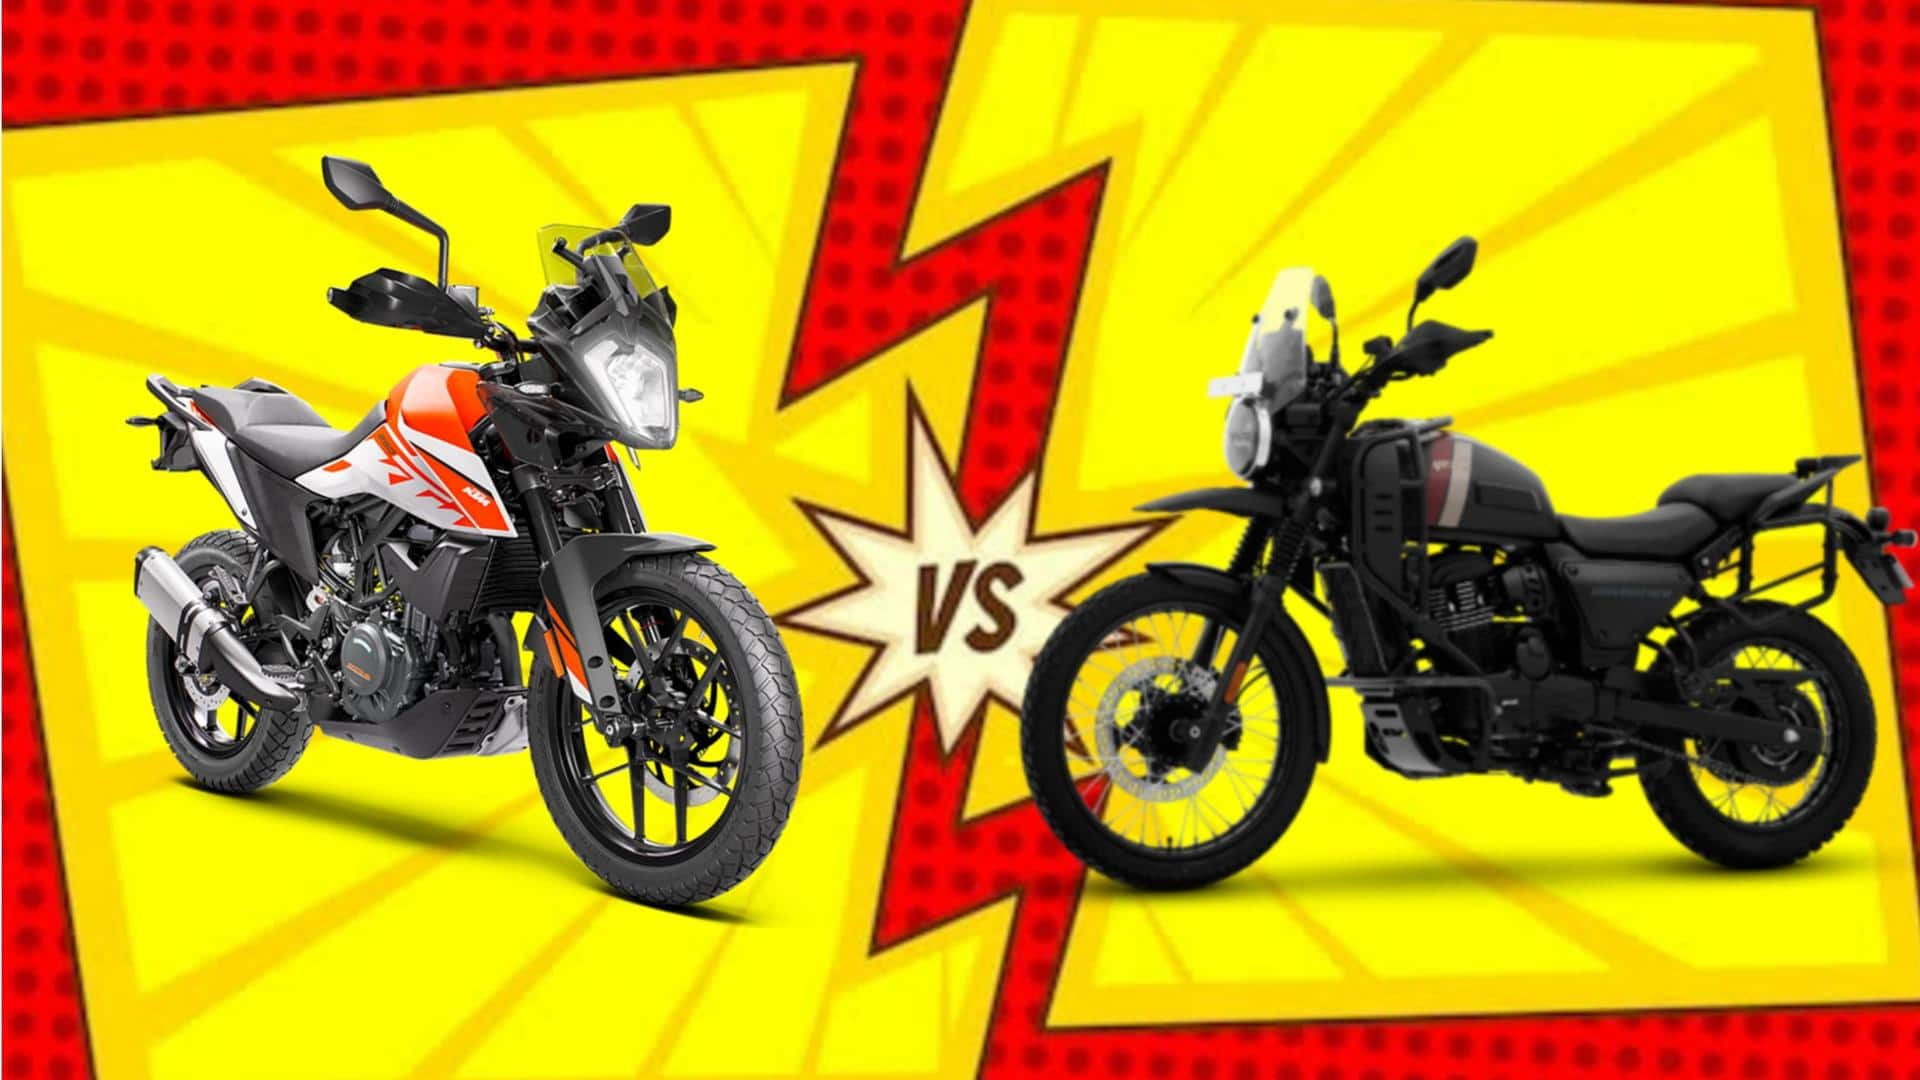 Is KTM 250 Adventure's low-seat-height variant better than Yezdi Adventure